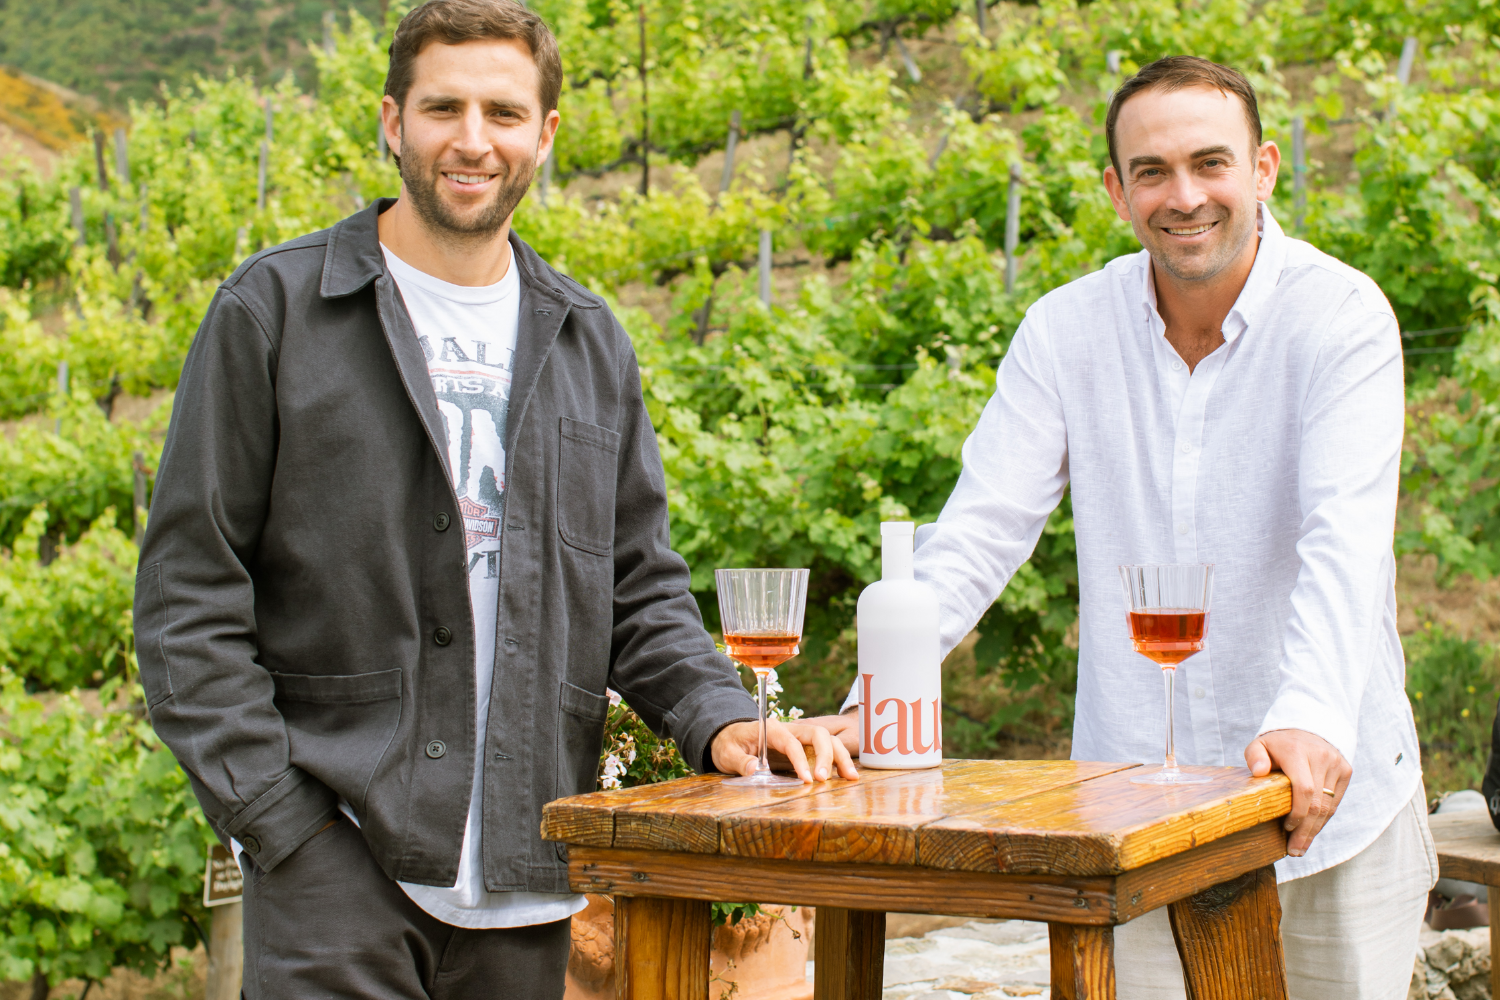 The Naked Market co-founders Harrison Fugman and Alex Kost pose for a photo with Haus brand drinks.